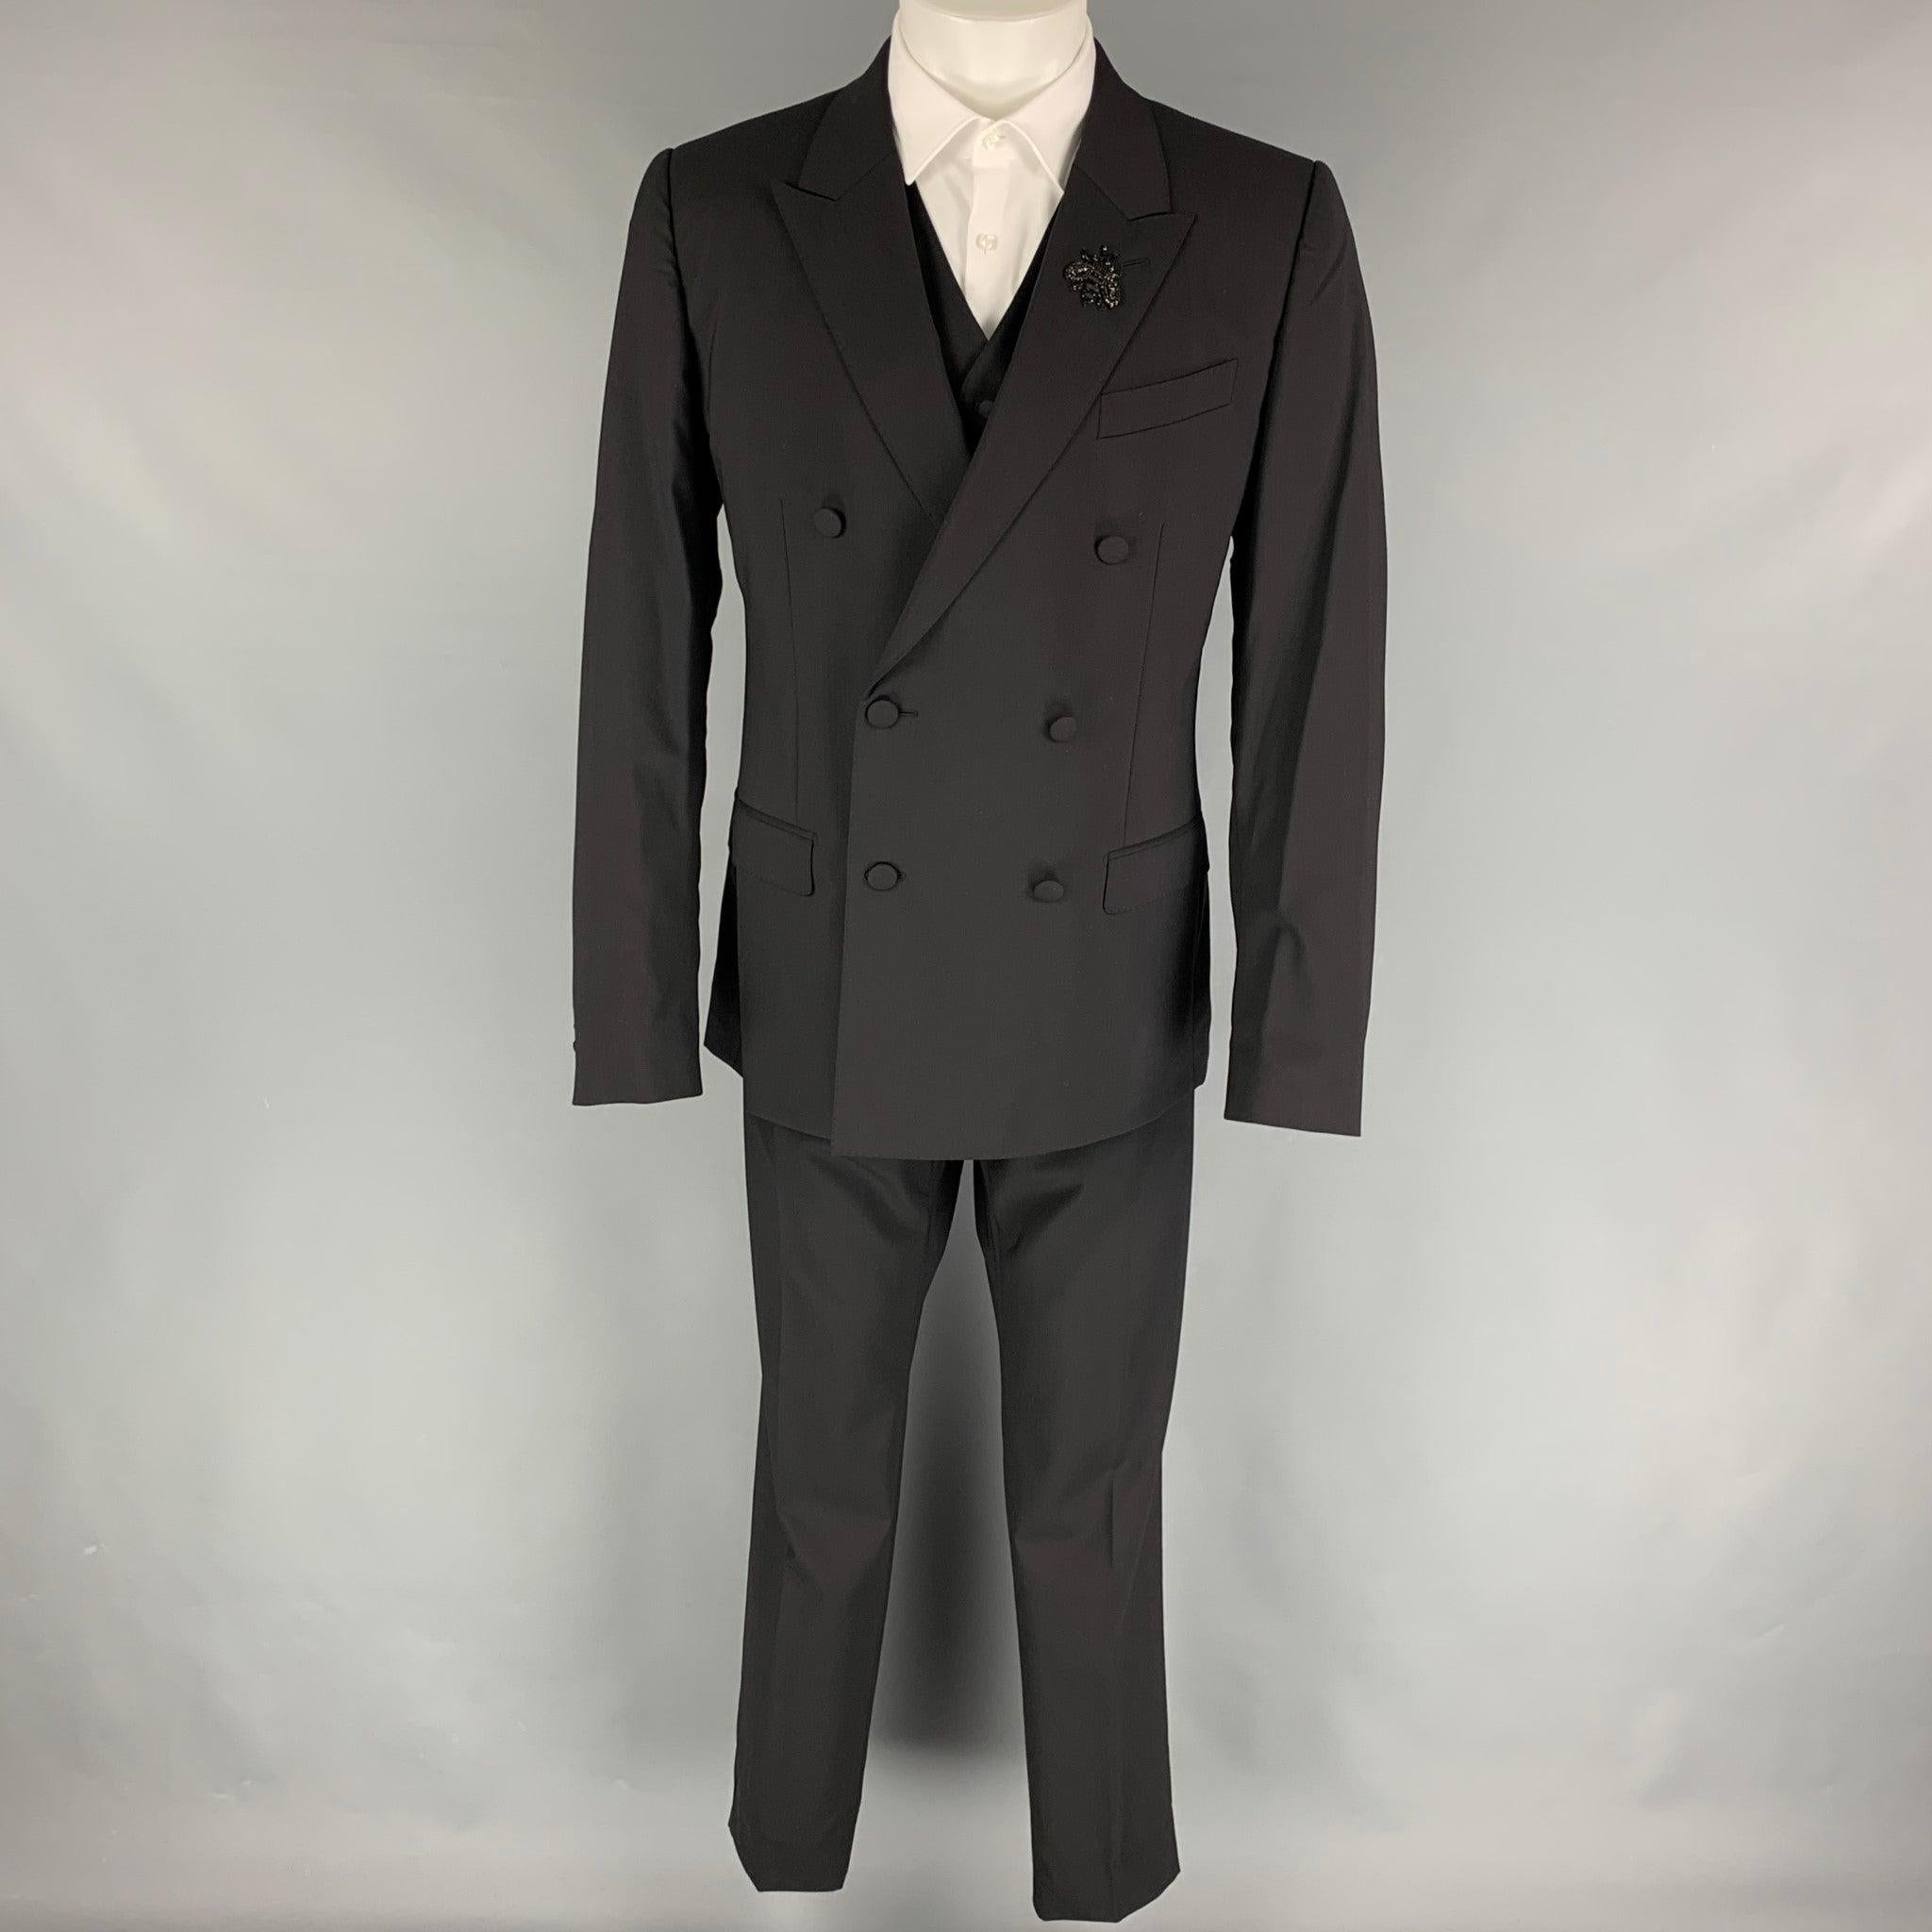 DOLCE & GABBANA Martini' 3 Piece suit comes in a black virgin wool with a full liner and includes a double breasted, six button sport coat with a peak lapel, beaded crystal embellishment and
 a matching vest and flat front trousers. Made in Italy.